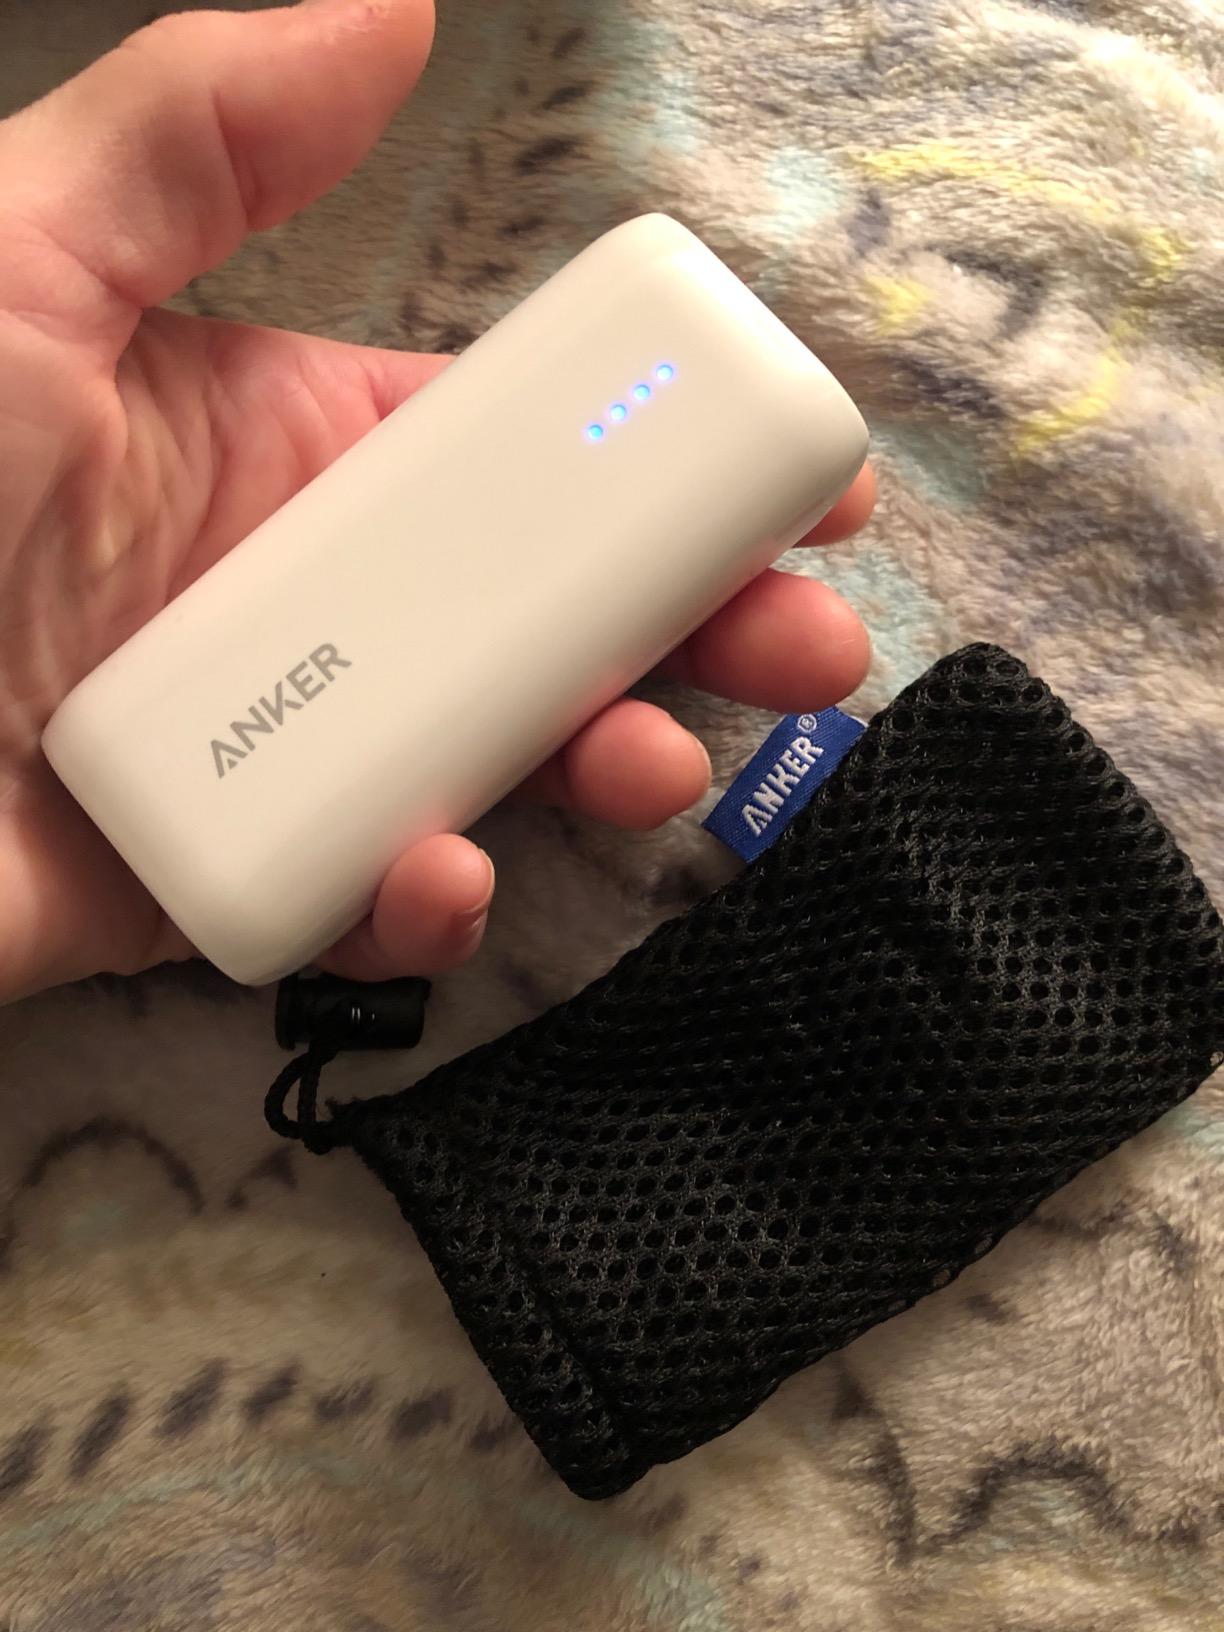 Great lightweight and compact power bank!